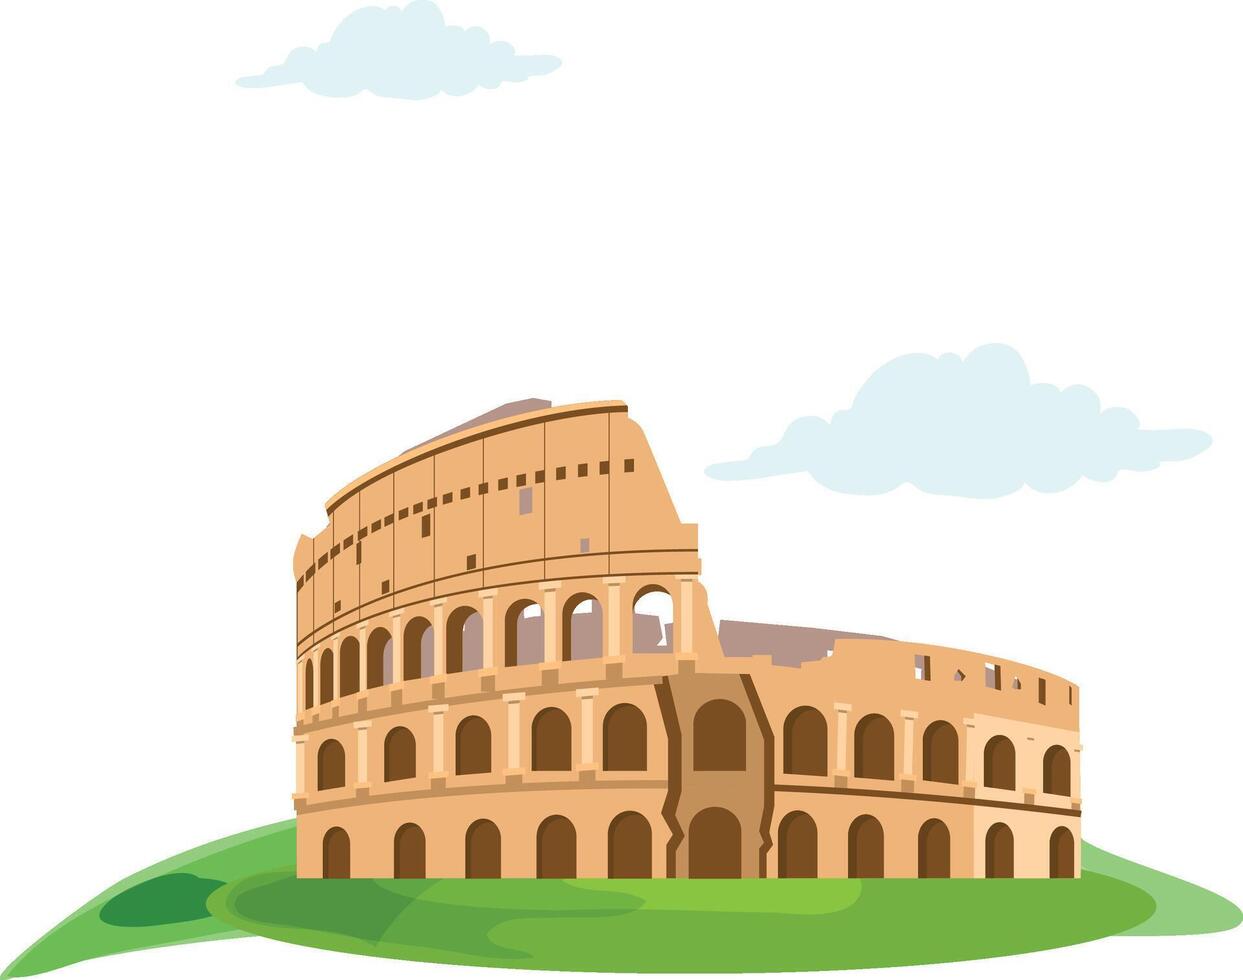 The Colosseum, Rome, Italy. World wonder vector